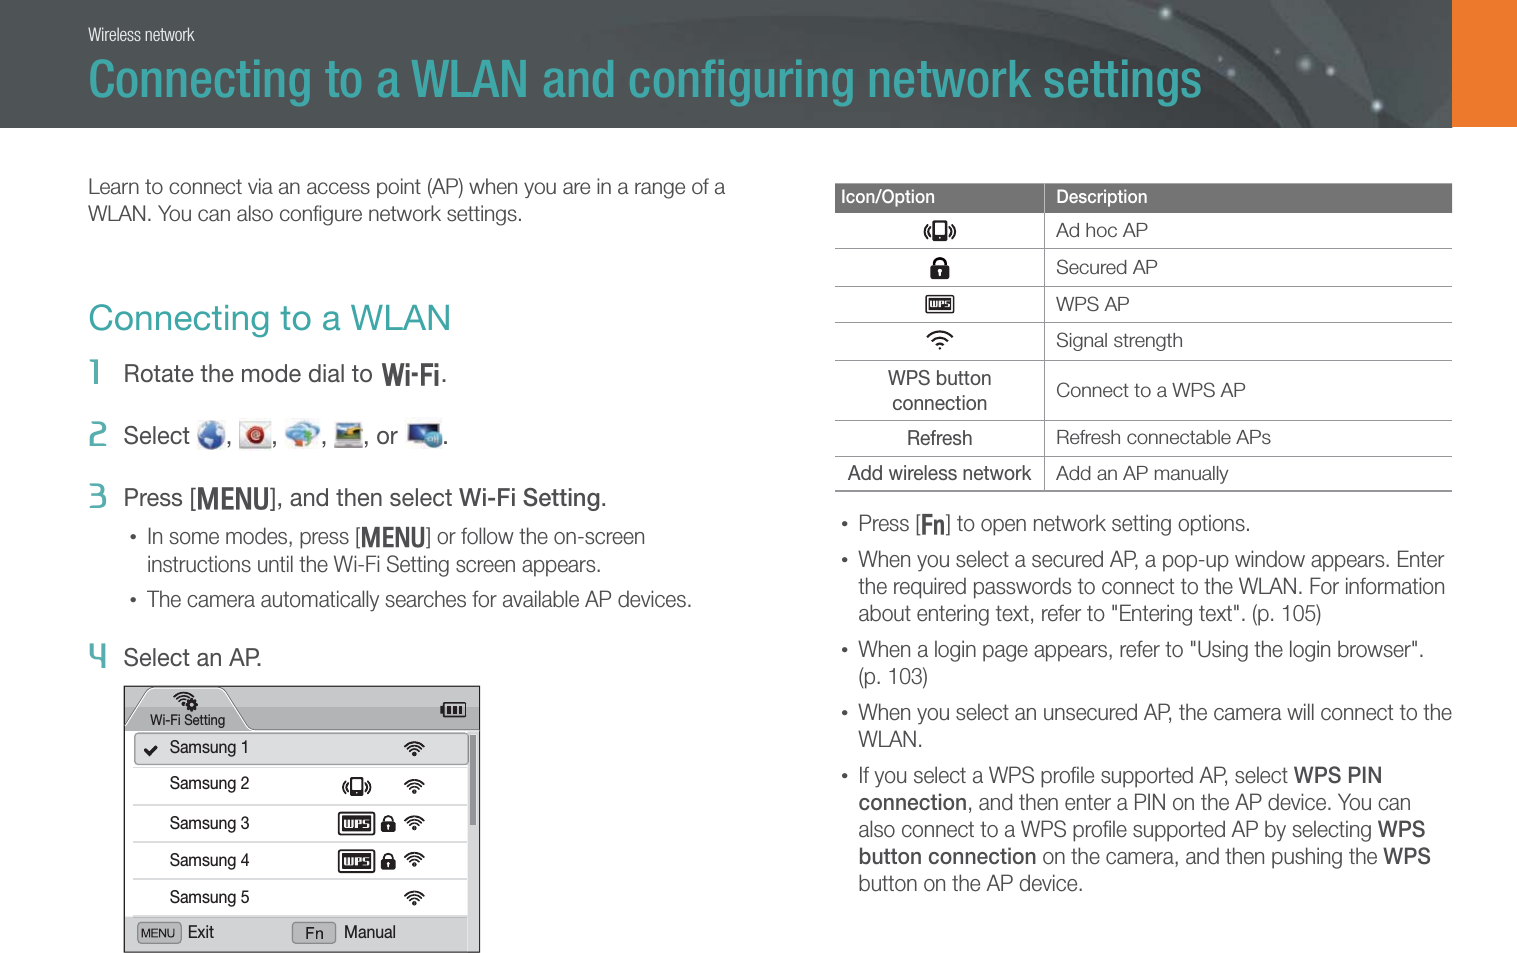 101Wireless networkConnecting to a WLAN and conﬁguring network settingsLearn to connect via an access point (AP) when you are in a range of a WLAN. You can also conﬁgure network settings.Connecting to a WLAN1  Rotate the mode dial to B.2  Select  , , ,  , or  .3  Press [m], and then select Wi-Fi Setting.• In some modes, press [m] or follow the on-screen instructions until the Wi-Fi Setting screen appears.• The camera automatically searches for available AP devices.4  Select an AP.Wi-Fi SettingExit ManualSamsung 2Samsung 1Samsung 3Samsung 4Samsung 5Icon/Option DescriptionAd hoc APSecured APWPS APSignal strengthWPS button connectionConnect to a WPS APRefreshRefresh connectable APsAdd wireless networkAdd an AP manually• Press [f] to open network setting options.• When you select a secured AP, a pop-up window appears. Enter the required passwords to connect to the WLAN. For information about entering text, refer to &quot;Entering text&quot;. (p. 105)• When a login page appears, refer to &quot;Using the login browser&quot;. (p. 103)• When you select an unsecured AP, the camera will connect to the WLAN.• If you select a WPS proﬁle supported AP, select WPS PIN connection, and then enter a PIN on the AP device. You can also connect to a WPS proﬁle supported AP by selecting WPS button connection on the camera, and then pushing the WPS button on the AP device.